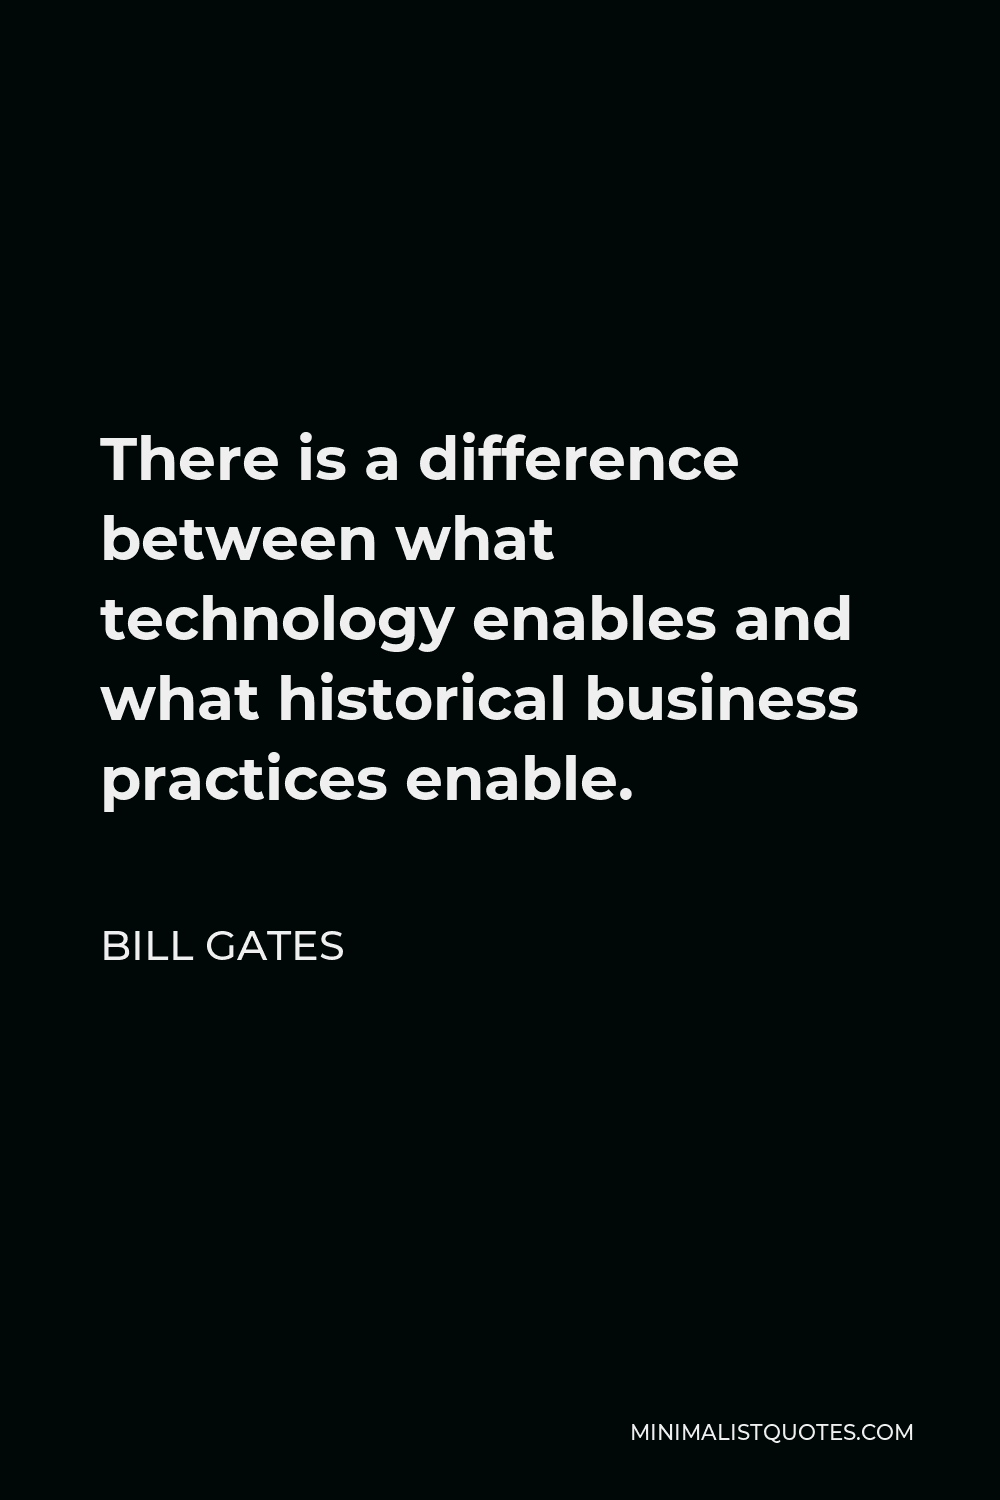 Bill Gates Quote - There is a difference between what technology enables and what historical business practices enable.